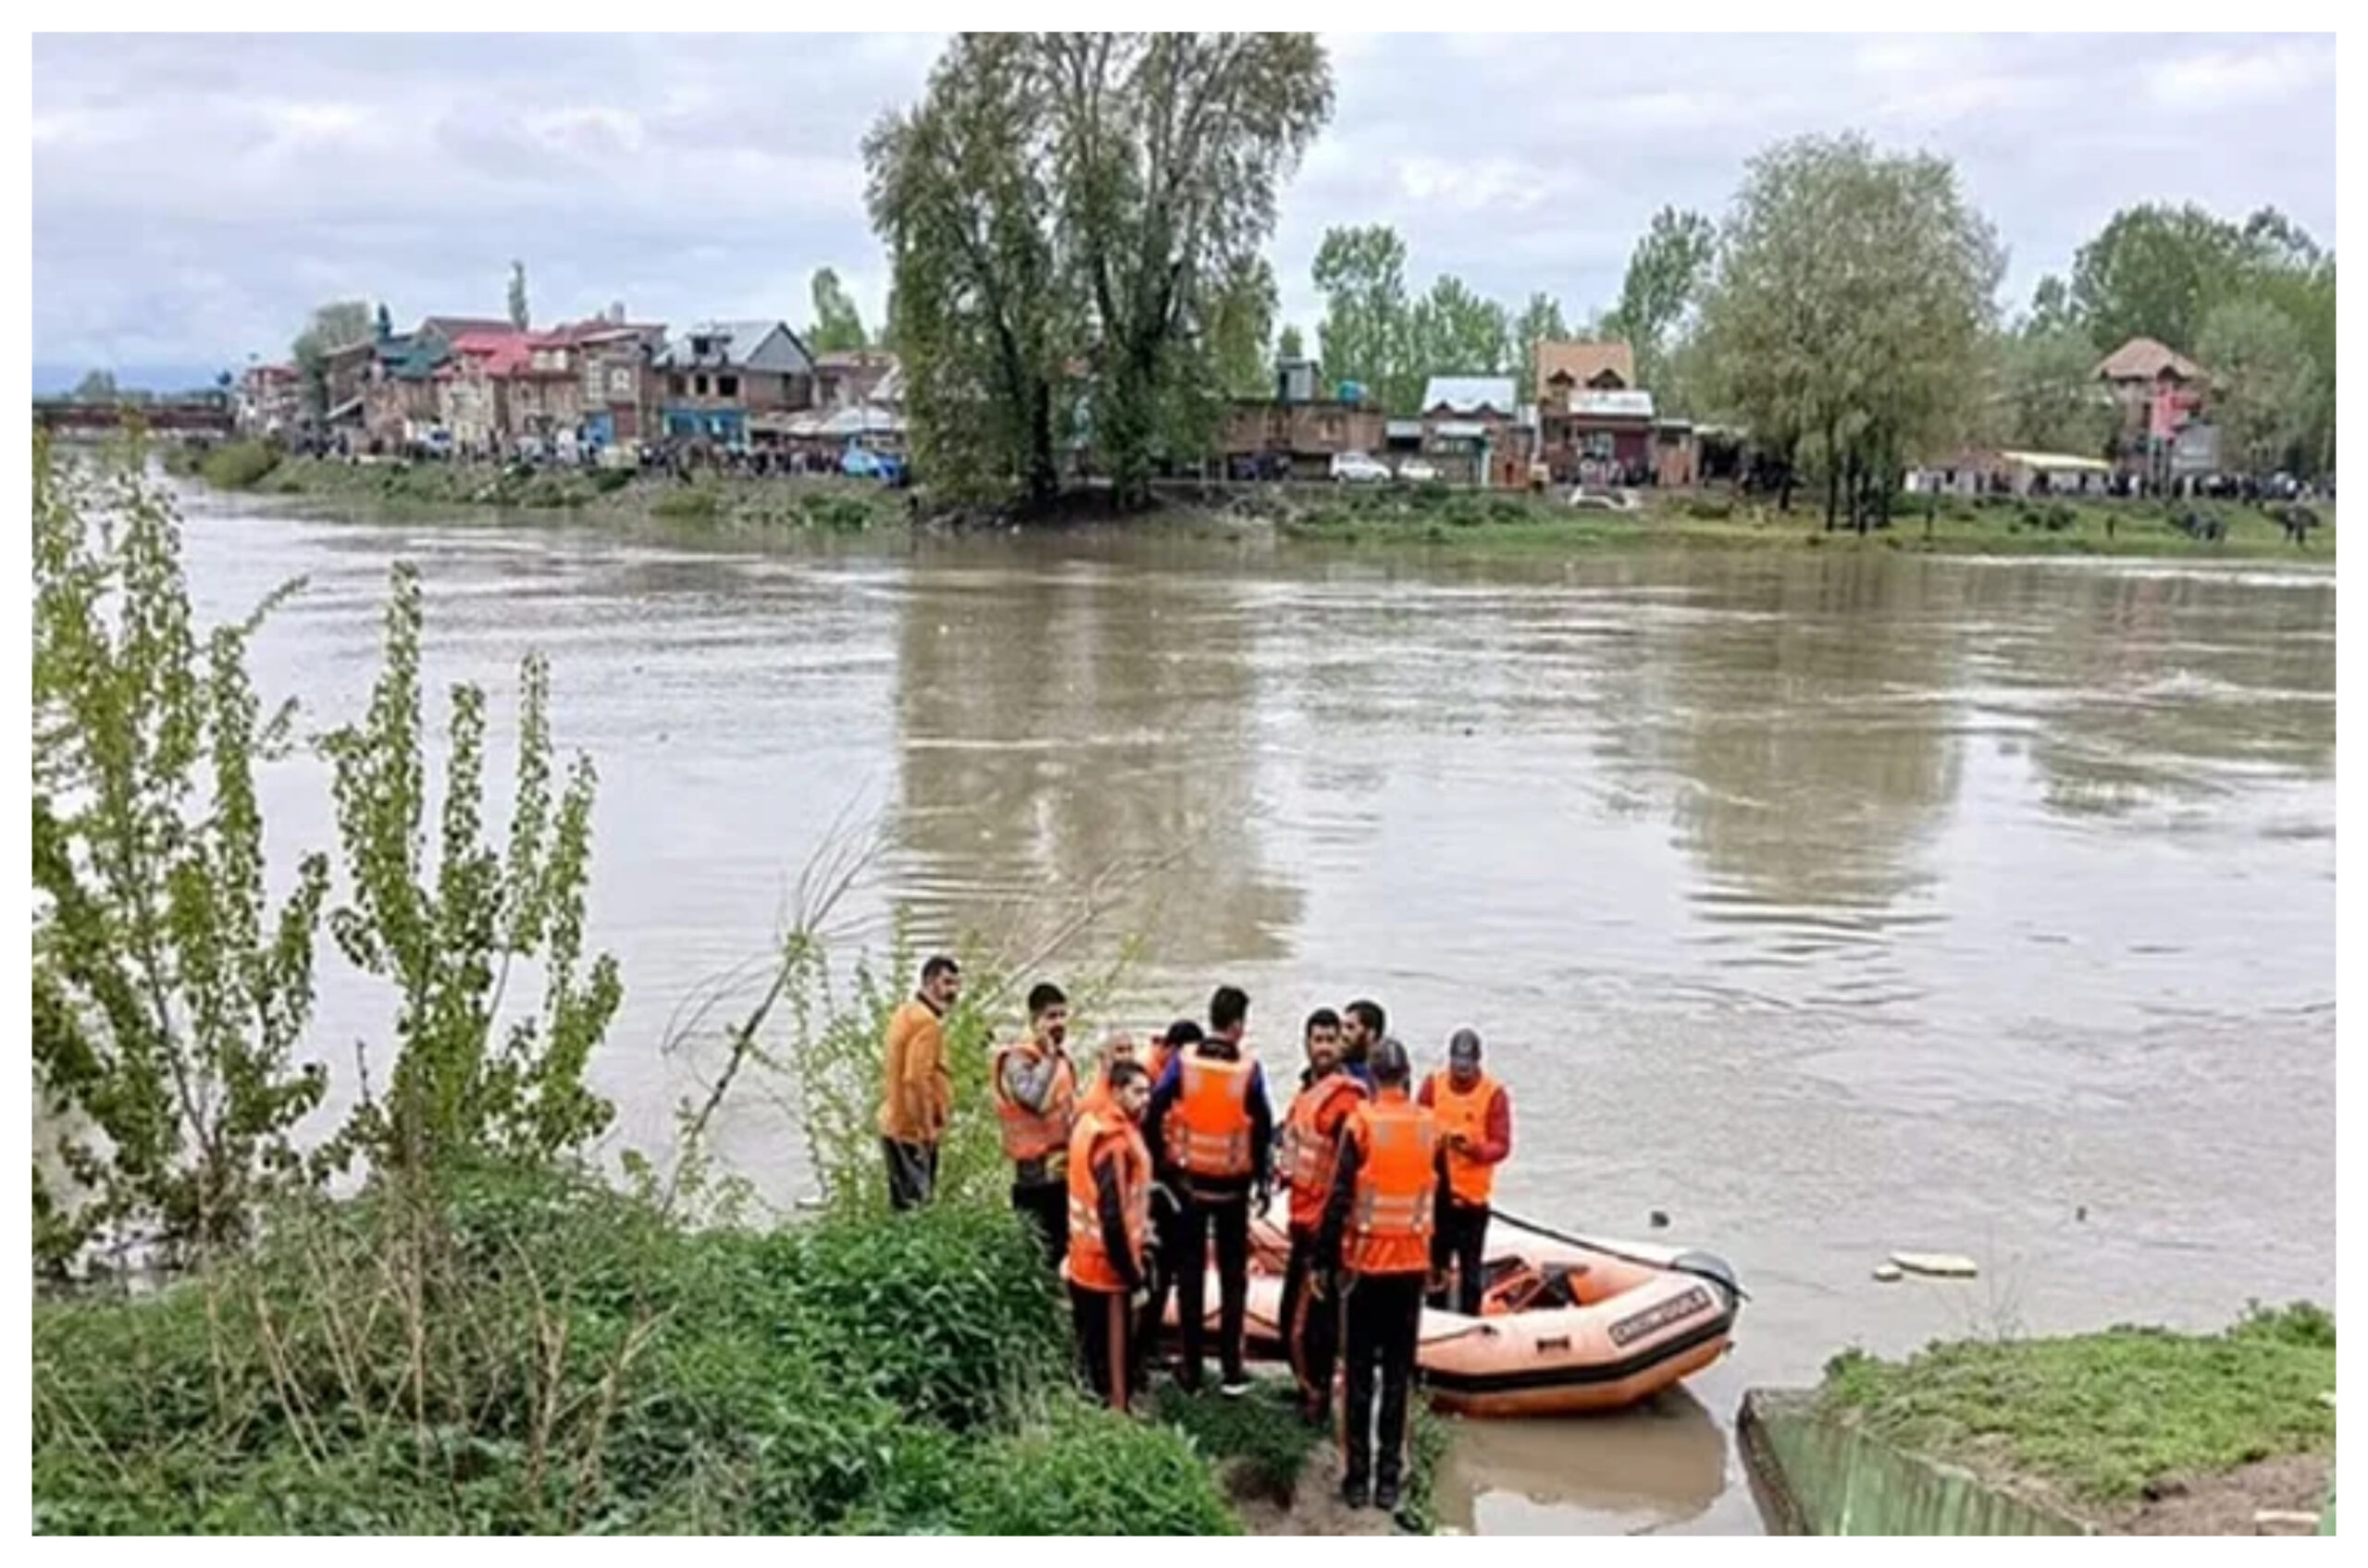 Jhelum River Accident: Joint search operation will continue to find dead bodies, srinagar-general,Jammu Kashmir News, Jhelam River, Kashmir News, Jhelum River Accident, boat Capsizing in kashmir, Jhelum River Rescue, Jammu Kashmir News, Jammu Kashmir Latest News,Jammu and Kashmir news